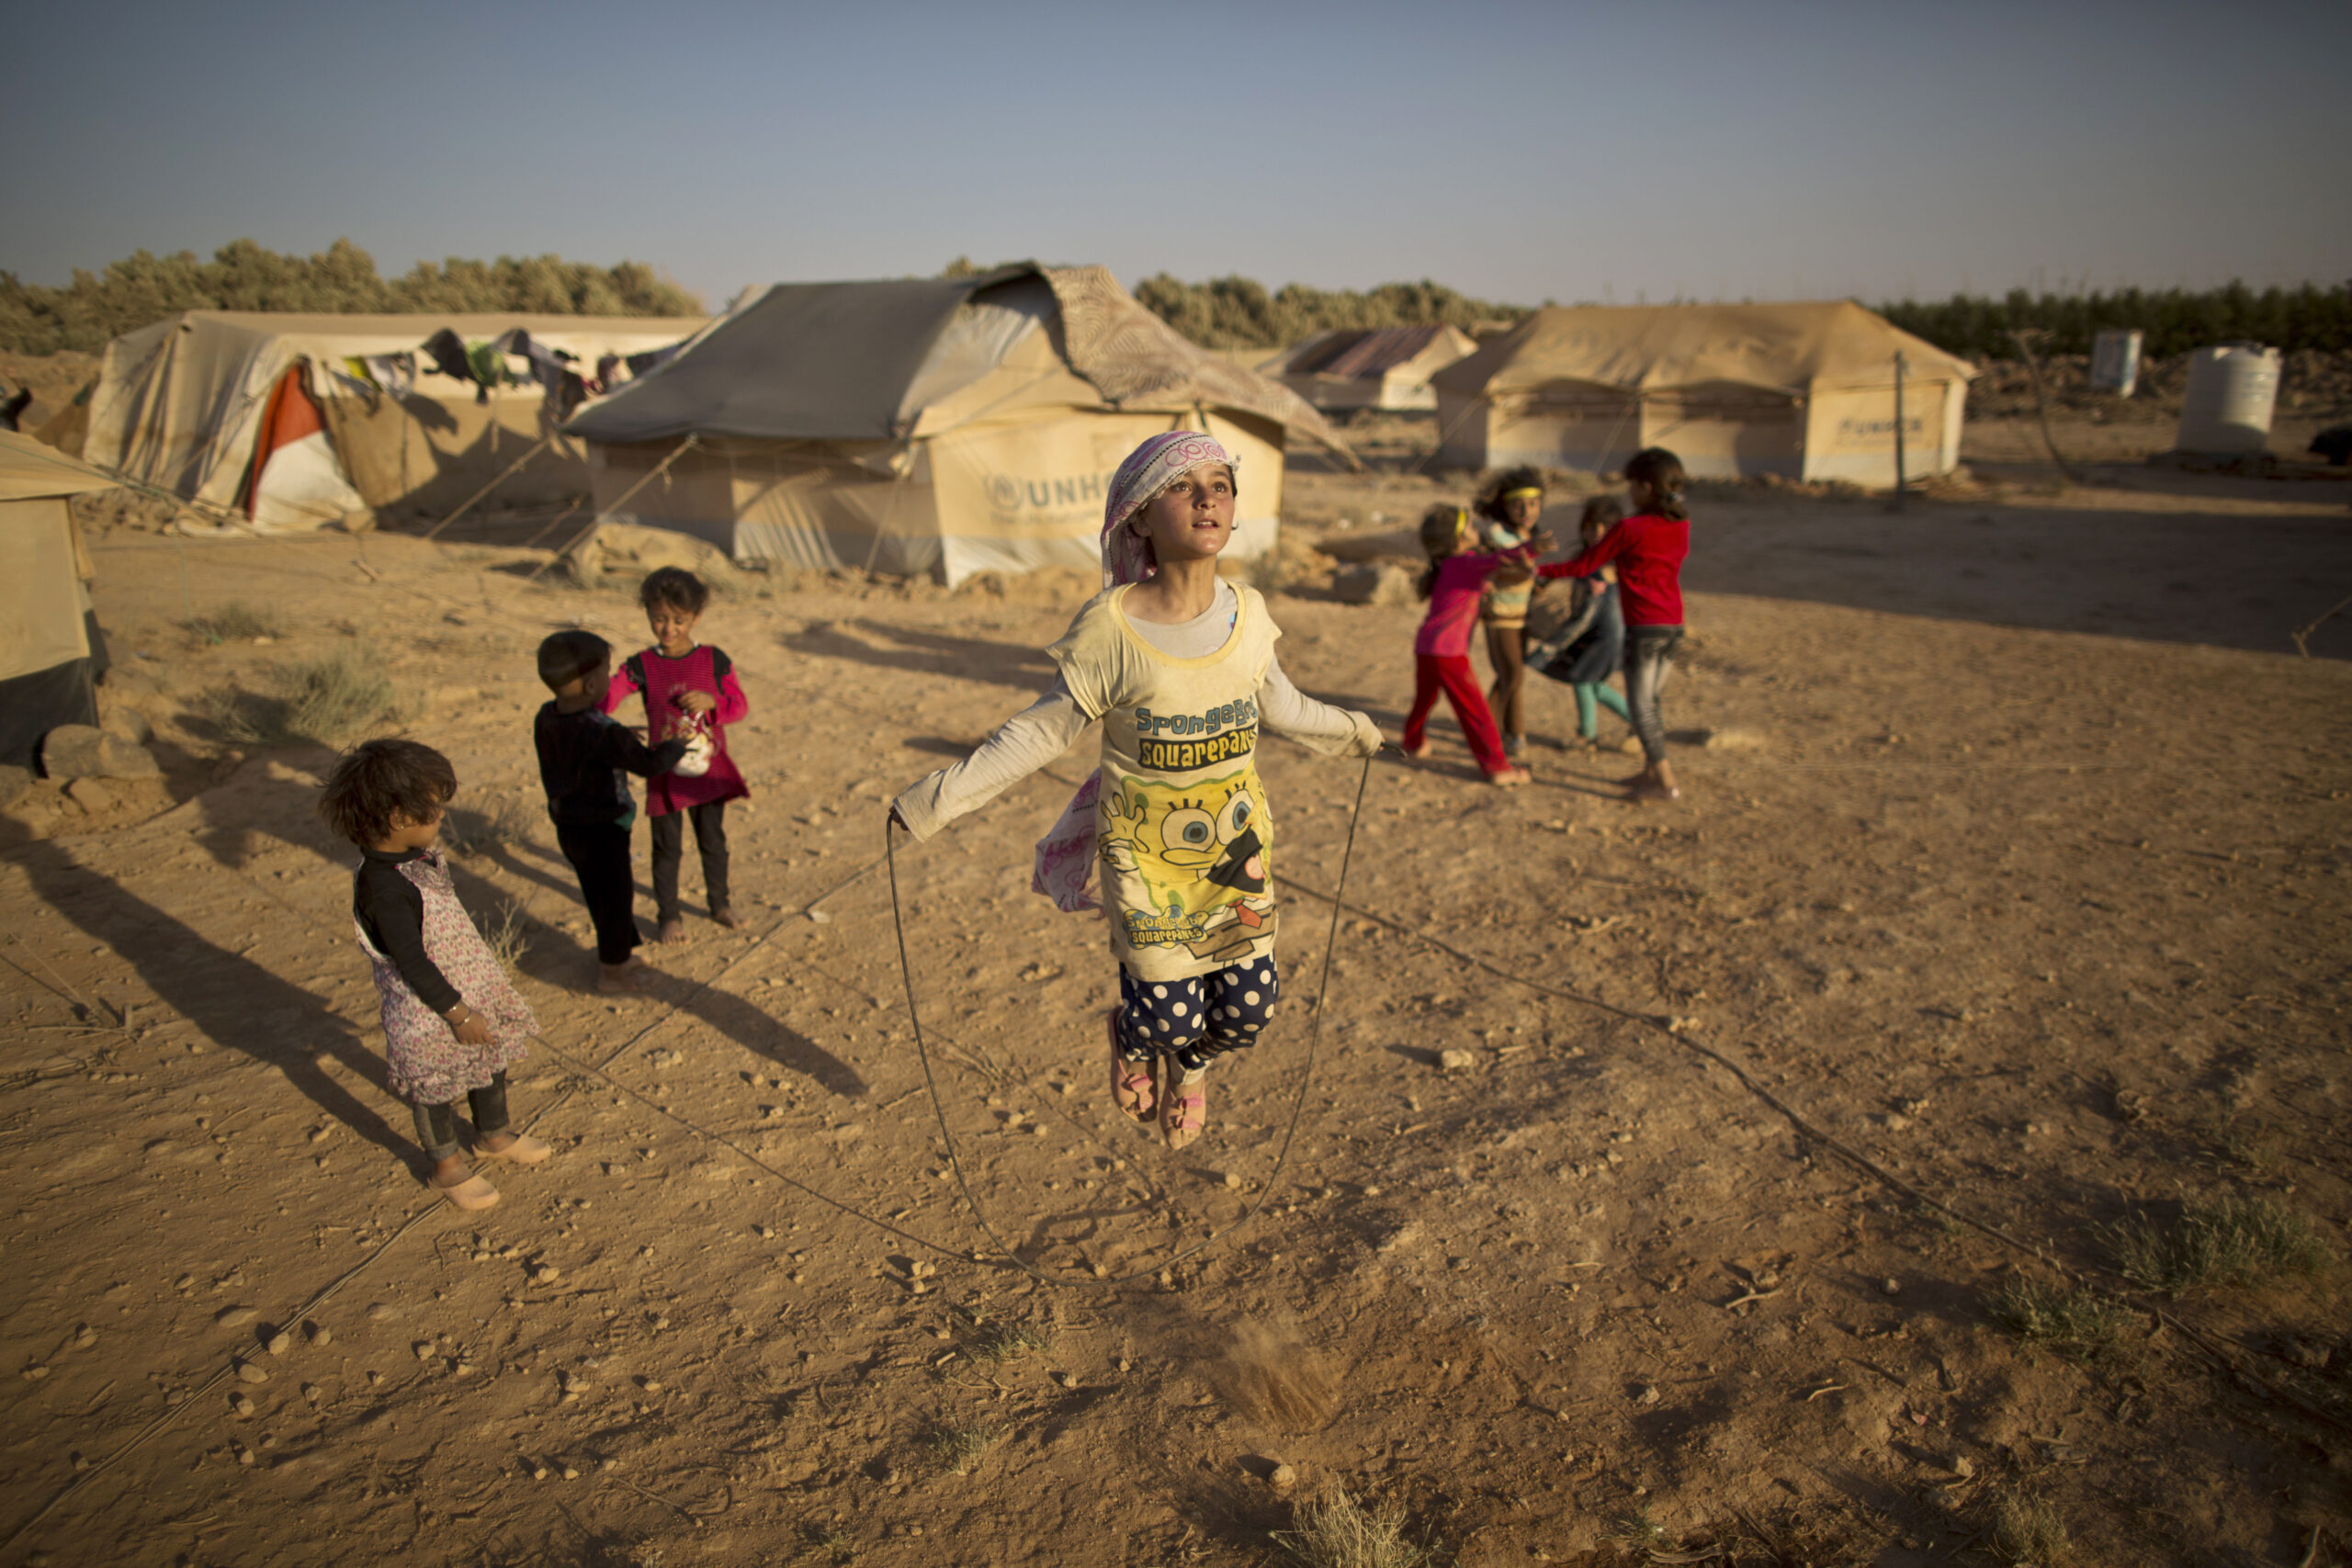 A Syrian girl skips a rope while she and other children play near their tents at an informal tented settlement near the Syrian border on the outskirts of Mafraq, Jordan, July 19, 2015. This is one of the images that will be on display at Xposure International Photography Festival. (AP Photo/Muhammed Muheisen)